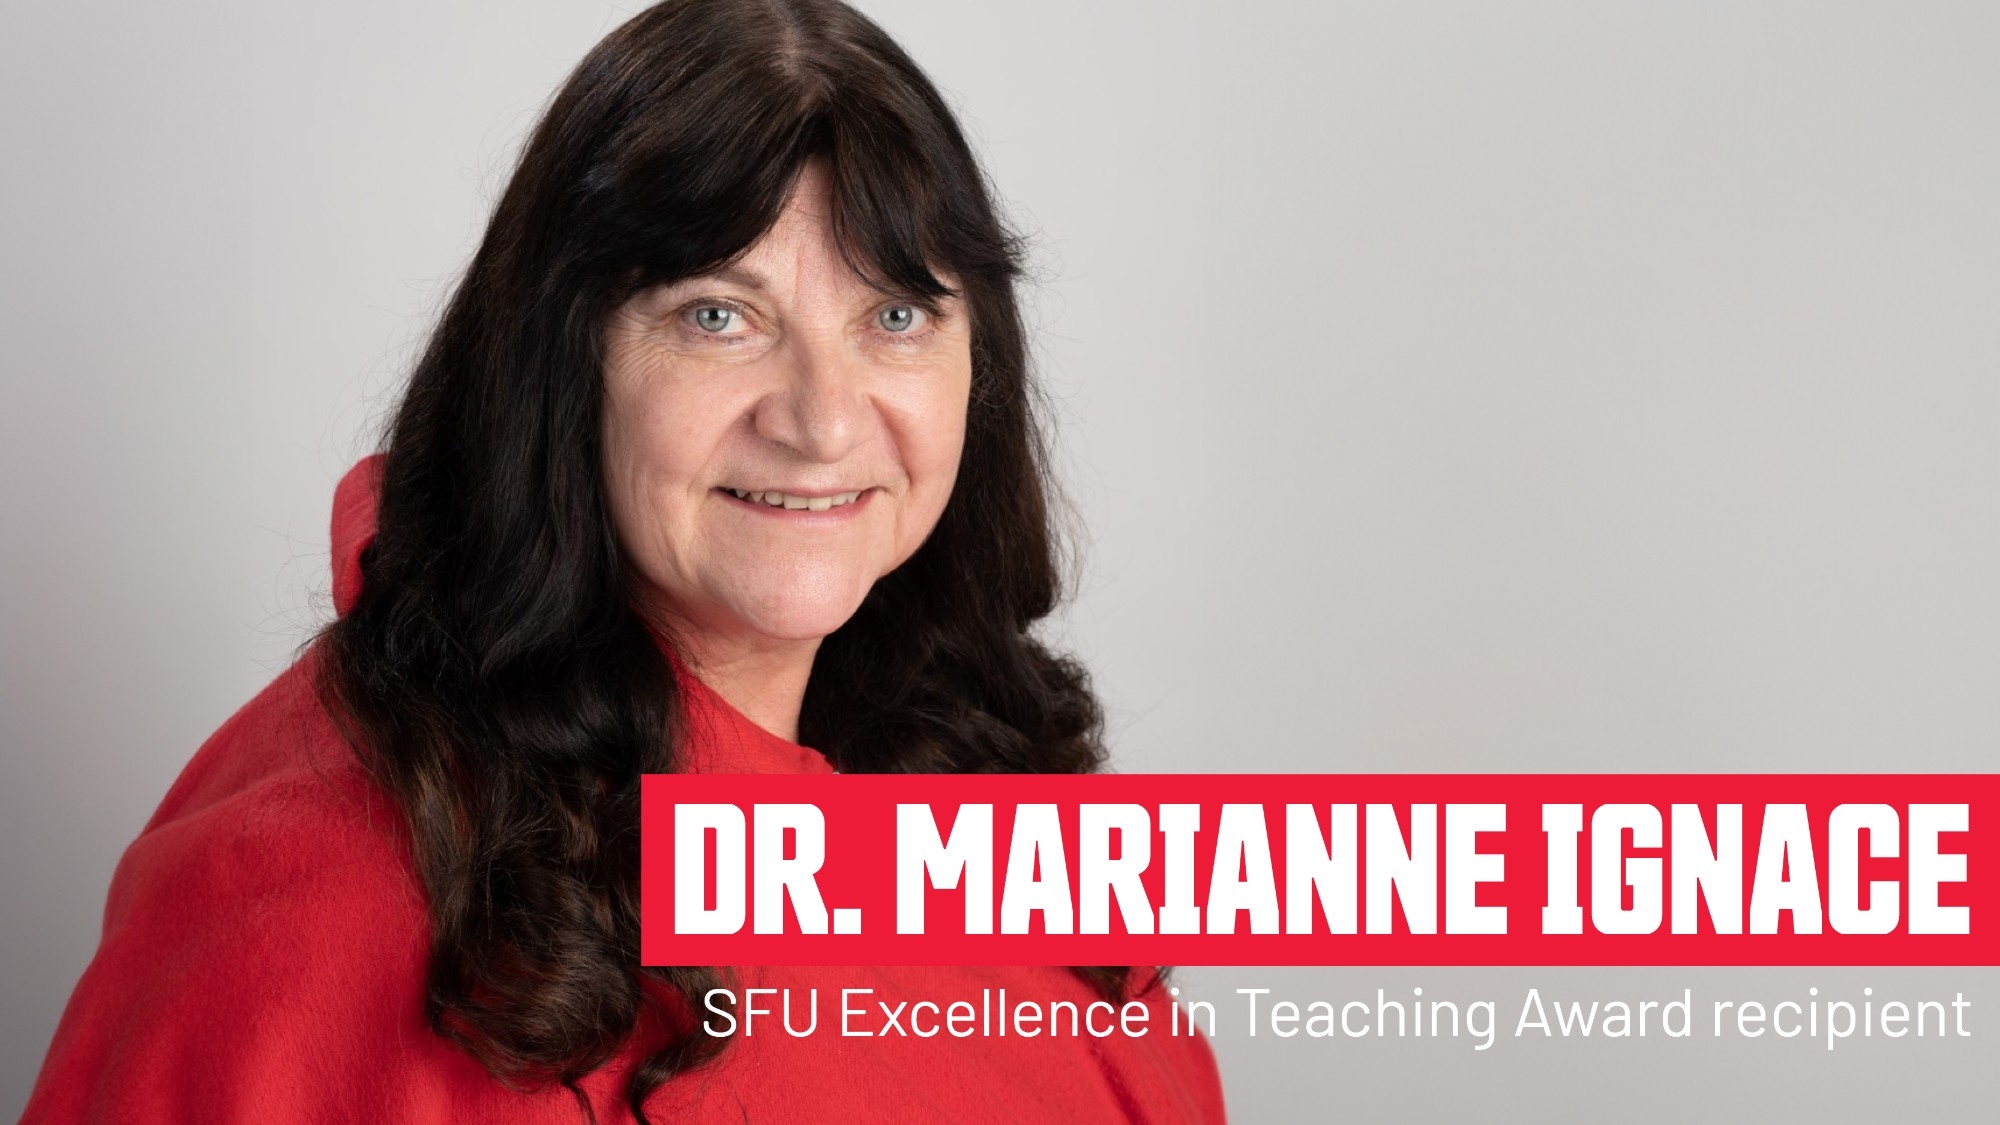 Female portrait photo with text "Dr. Marianne Ignace: SFU Excellence in Teaching Award recipient"